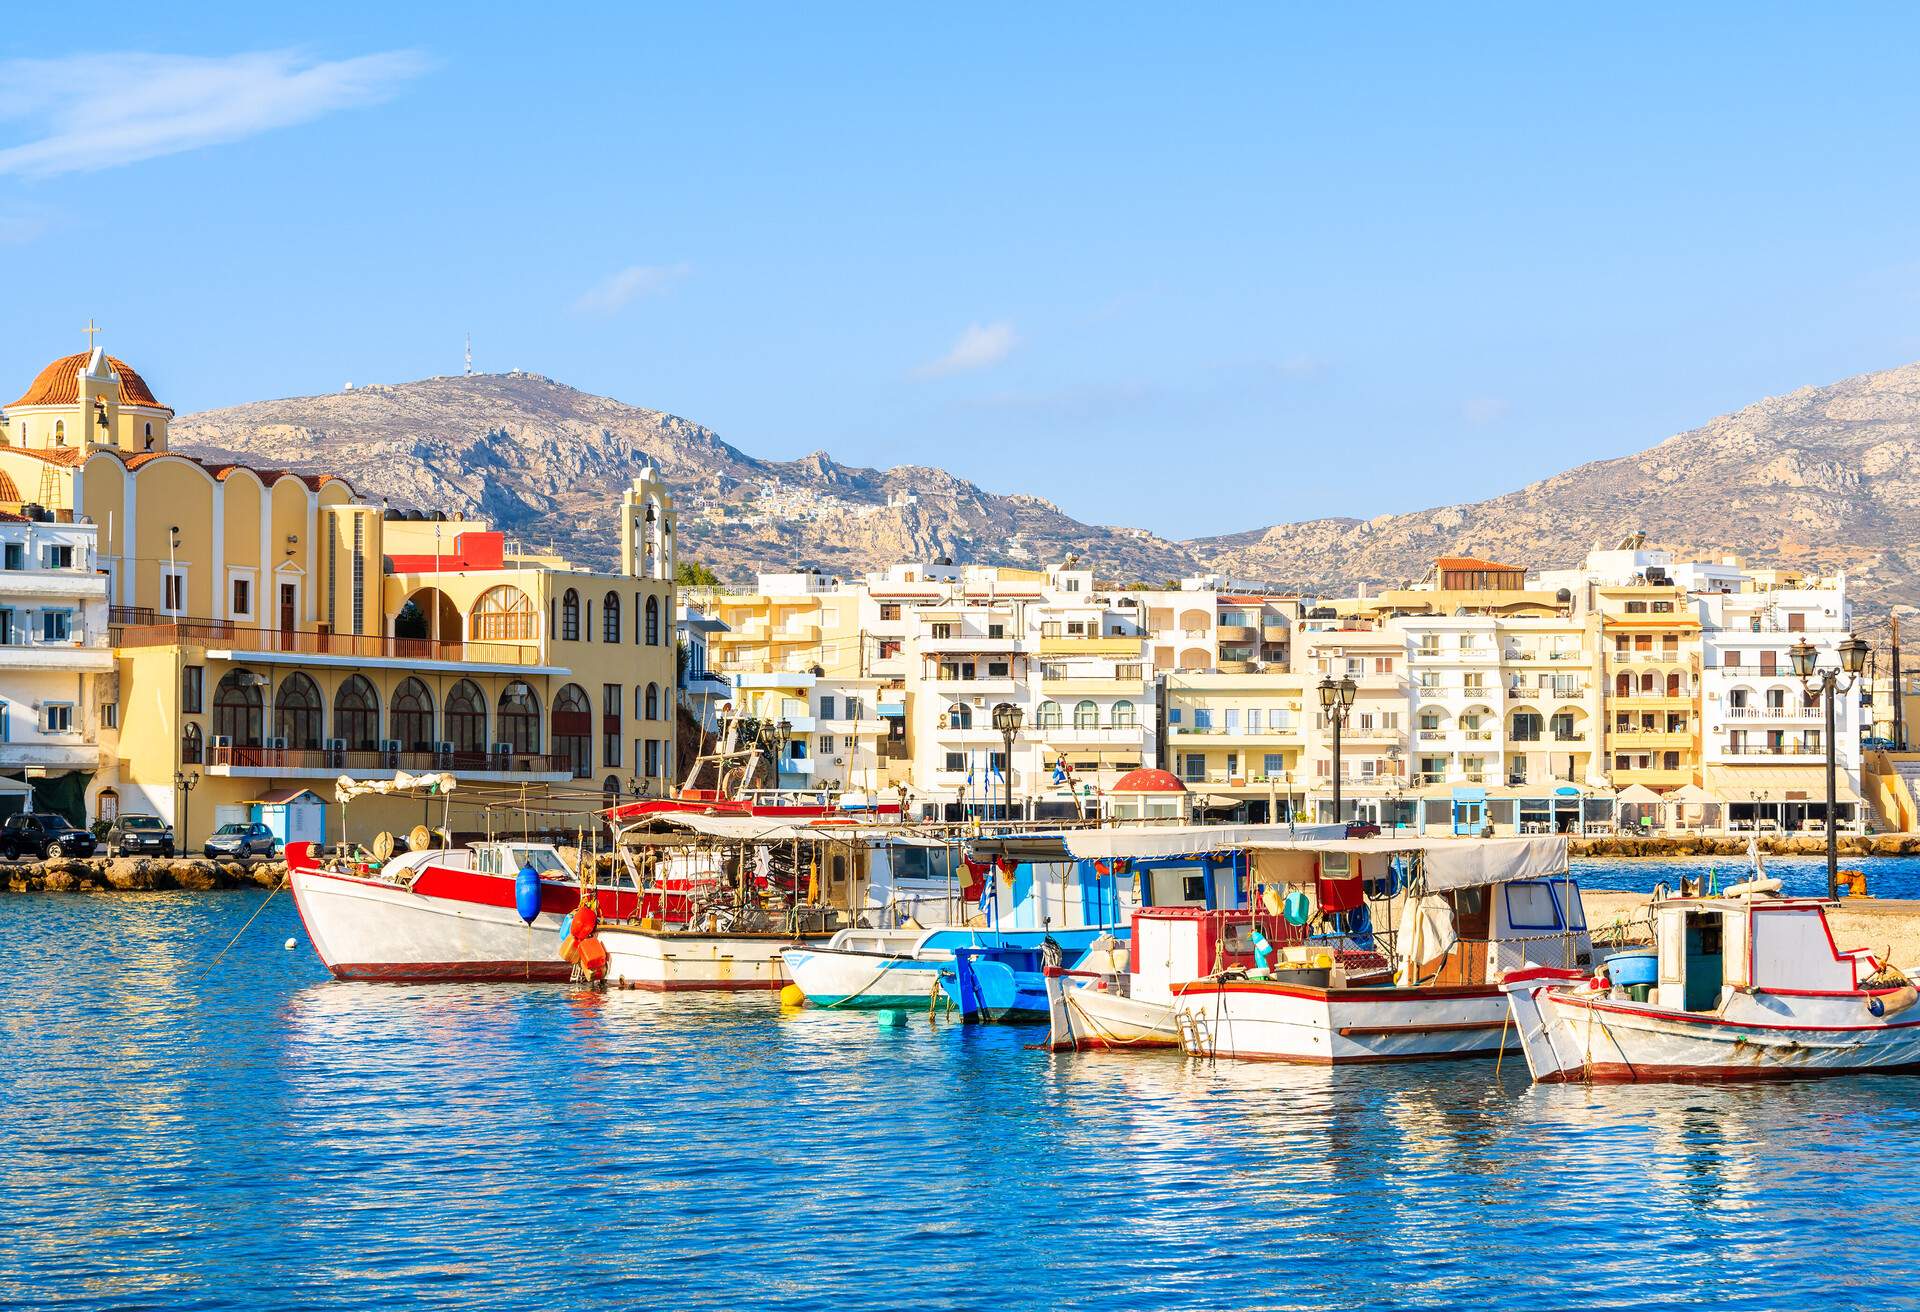 Boats in beautiful Pigadia fishing port with mountains in background, Karpathos island, Greece; Shutterstock ID 1408981349